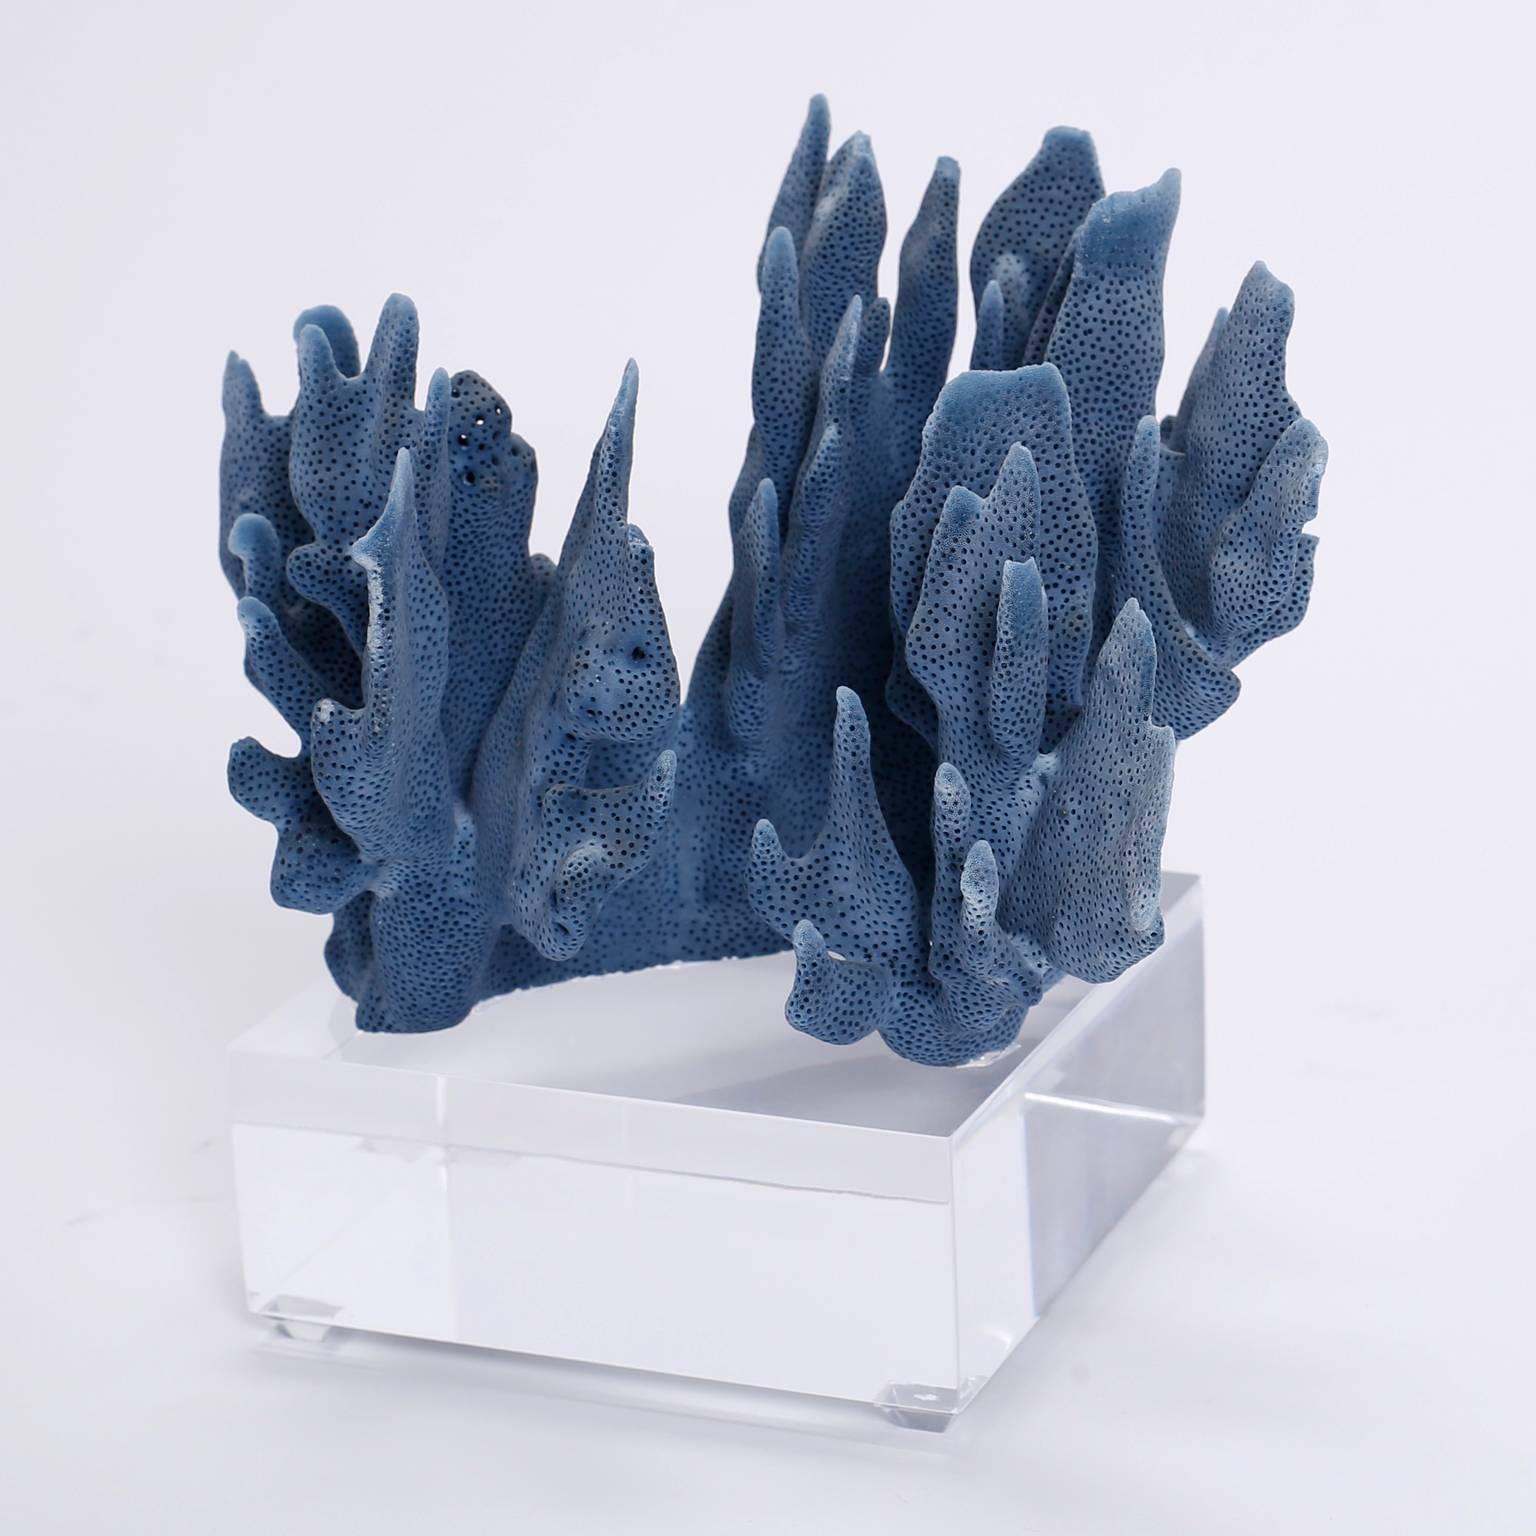 Enticing group of three blue coral specimens each with its own alluring sea inspired colors and organic shapes and textures. Presented on custom Lucite stands to enhance the sculptural elements. Priced individually. 

From left to right:

BL04- H